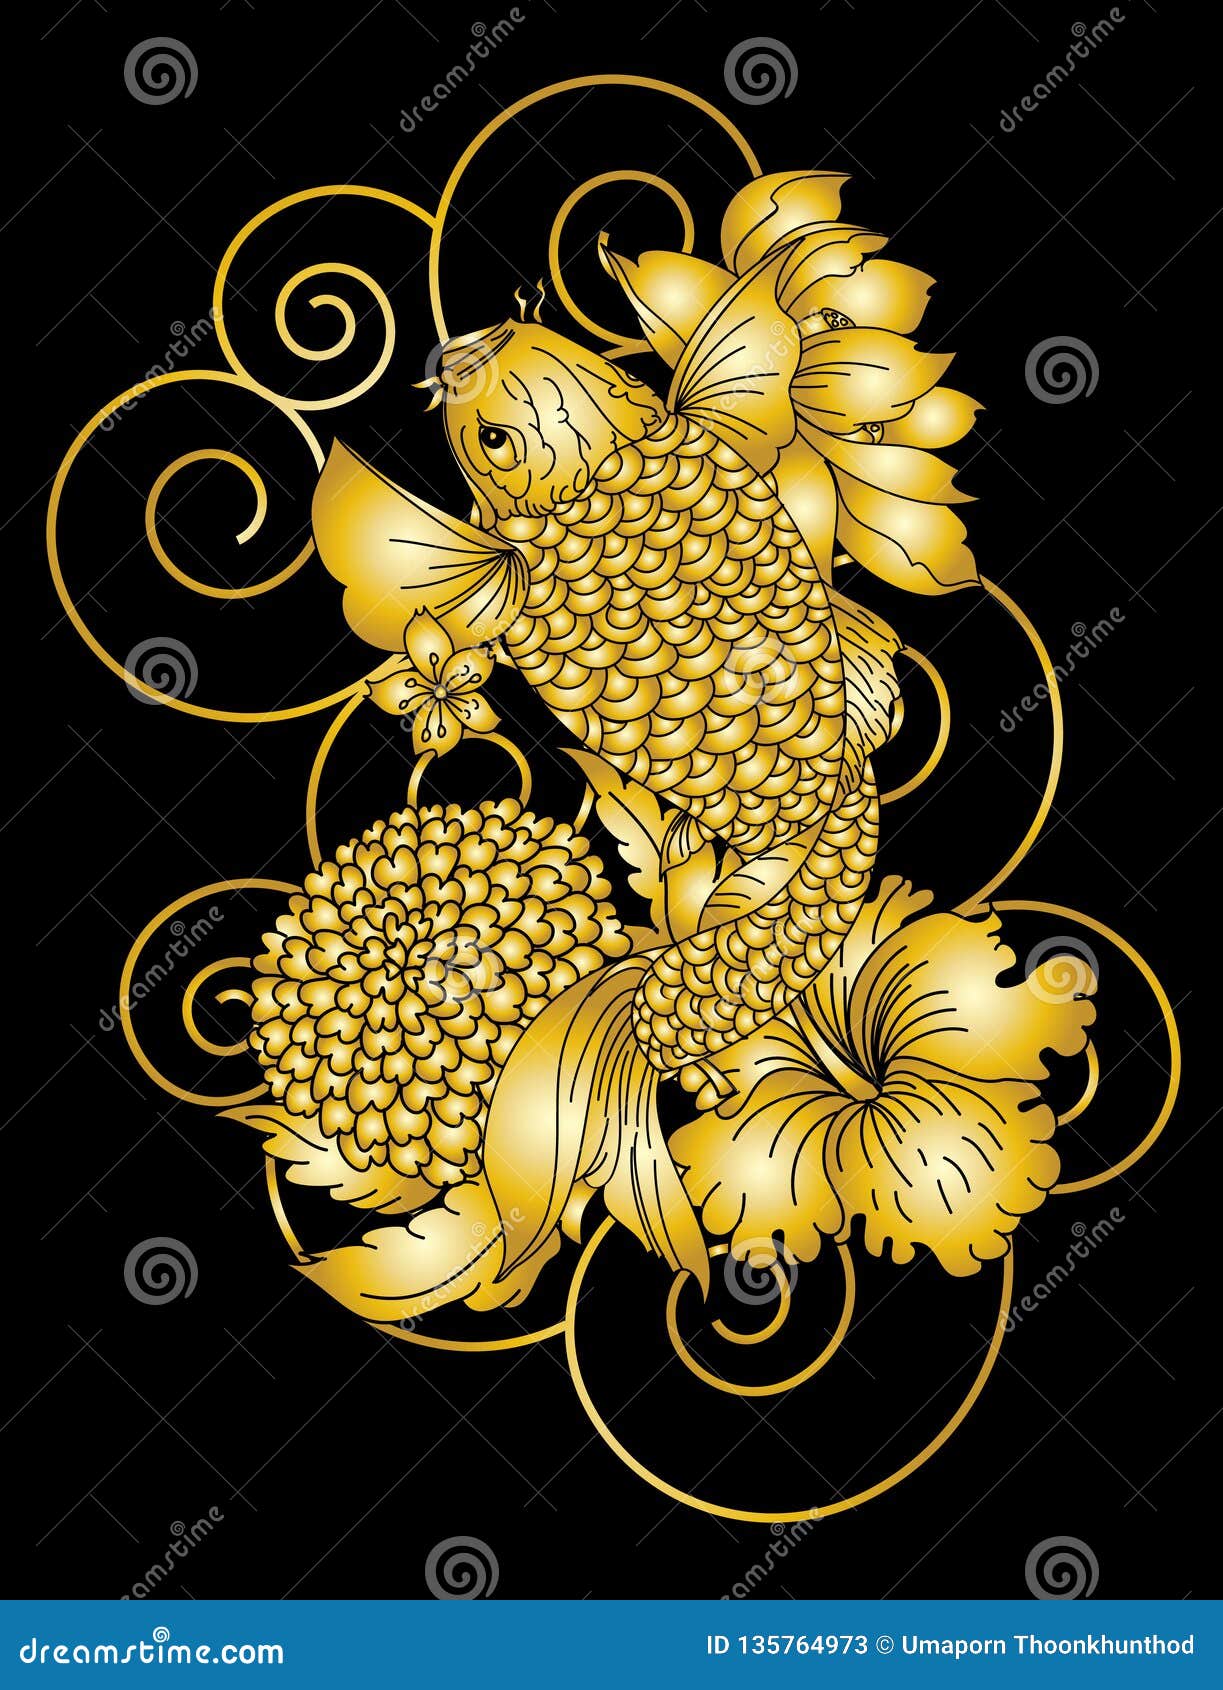 Goden Koi Fish with Lotus Flower and Chrysanthemum Flower Tattoo Style.  Stock Vector - Illustration of tattoo, fish: 135764973